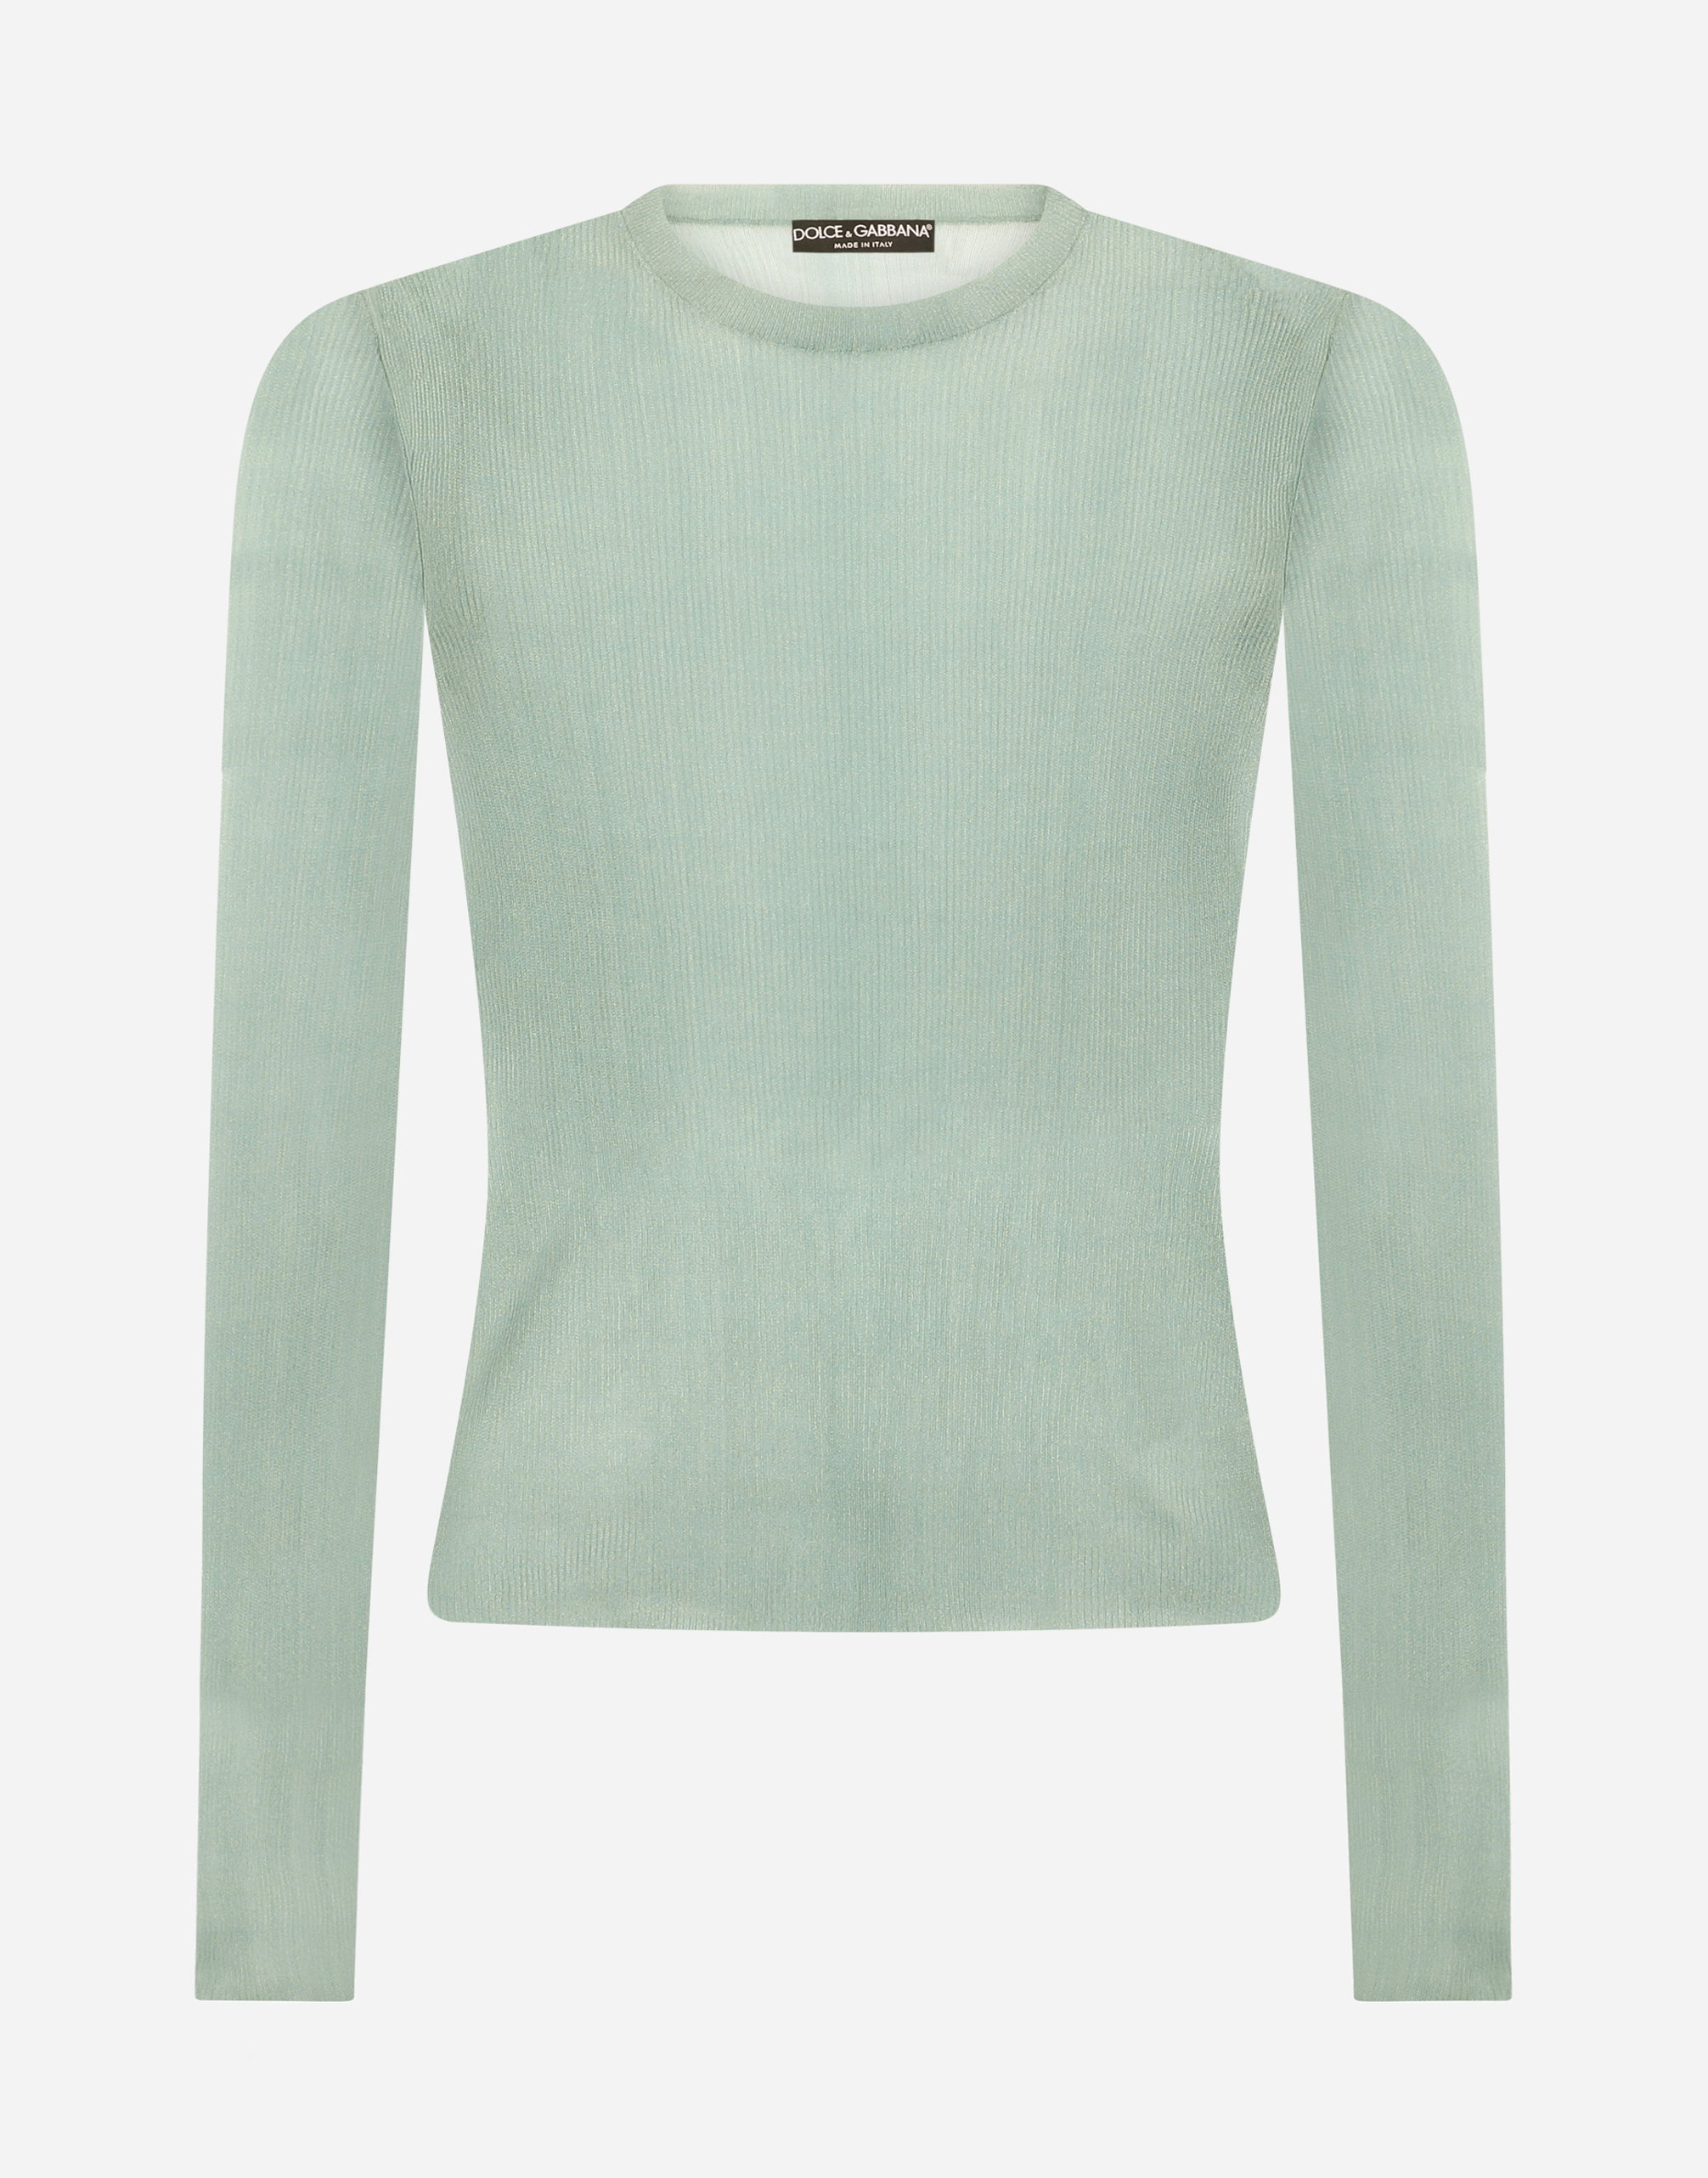 Ribbed technical yarn round-neck sweater in Teal